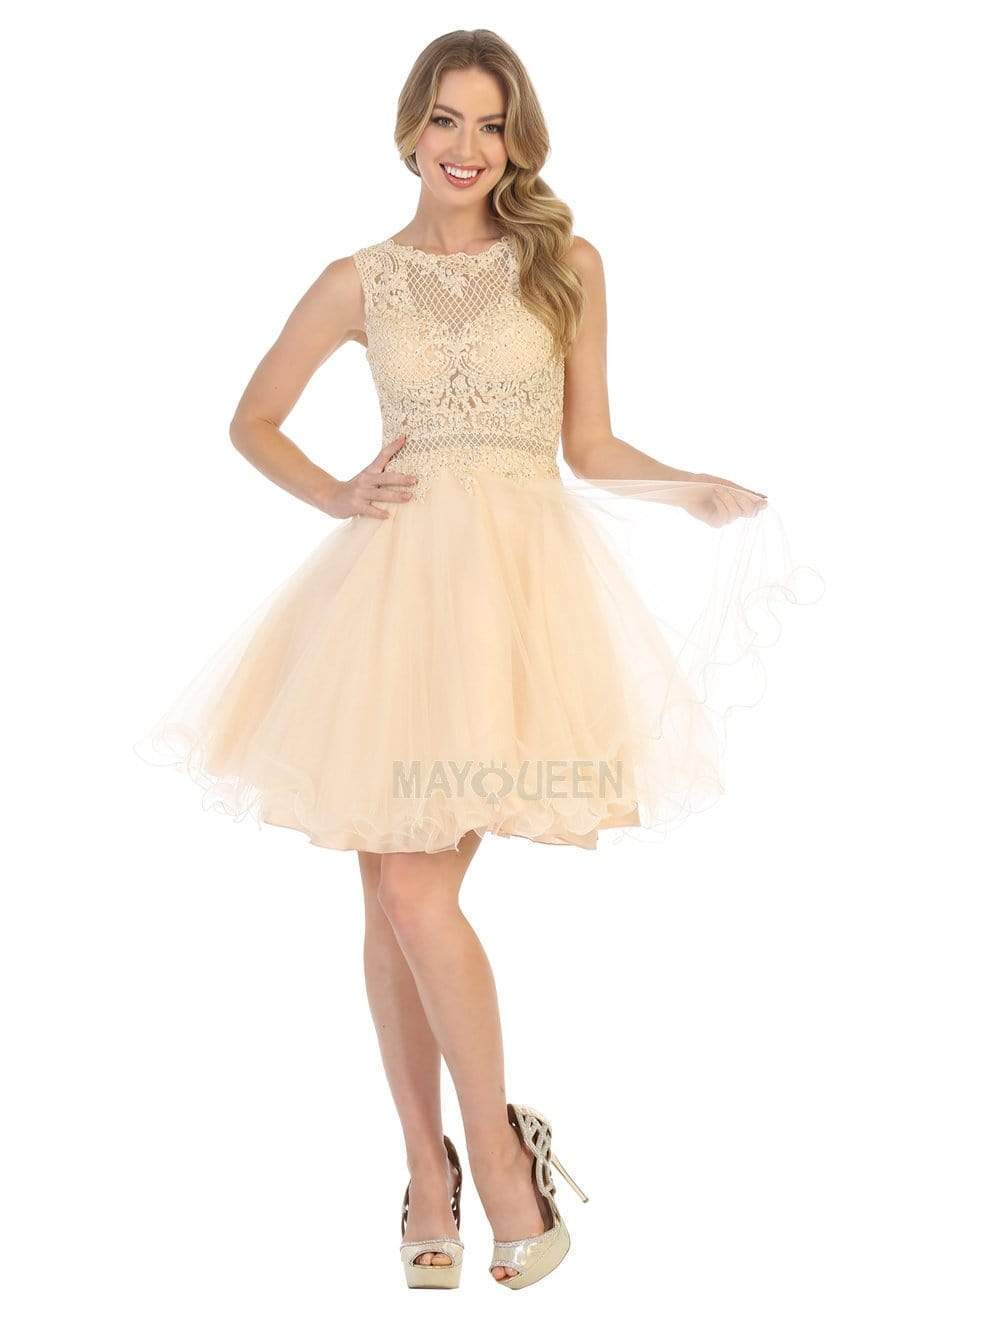 May Queen - MQ1751 Embroidered Bateau A-line Dress Homecoming Dresses 4 / Champagne